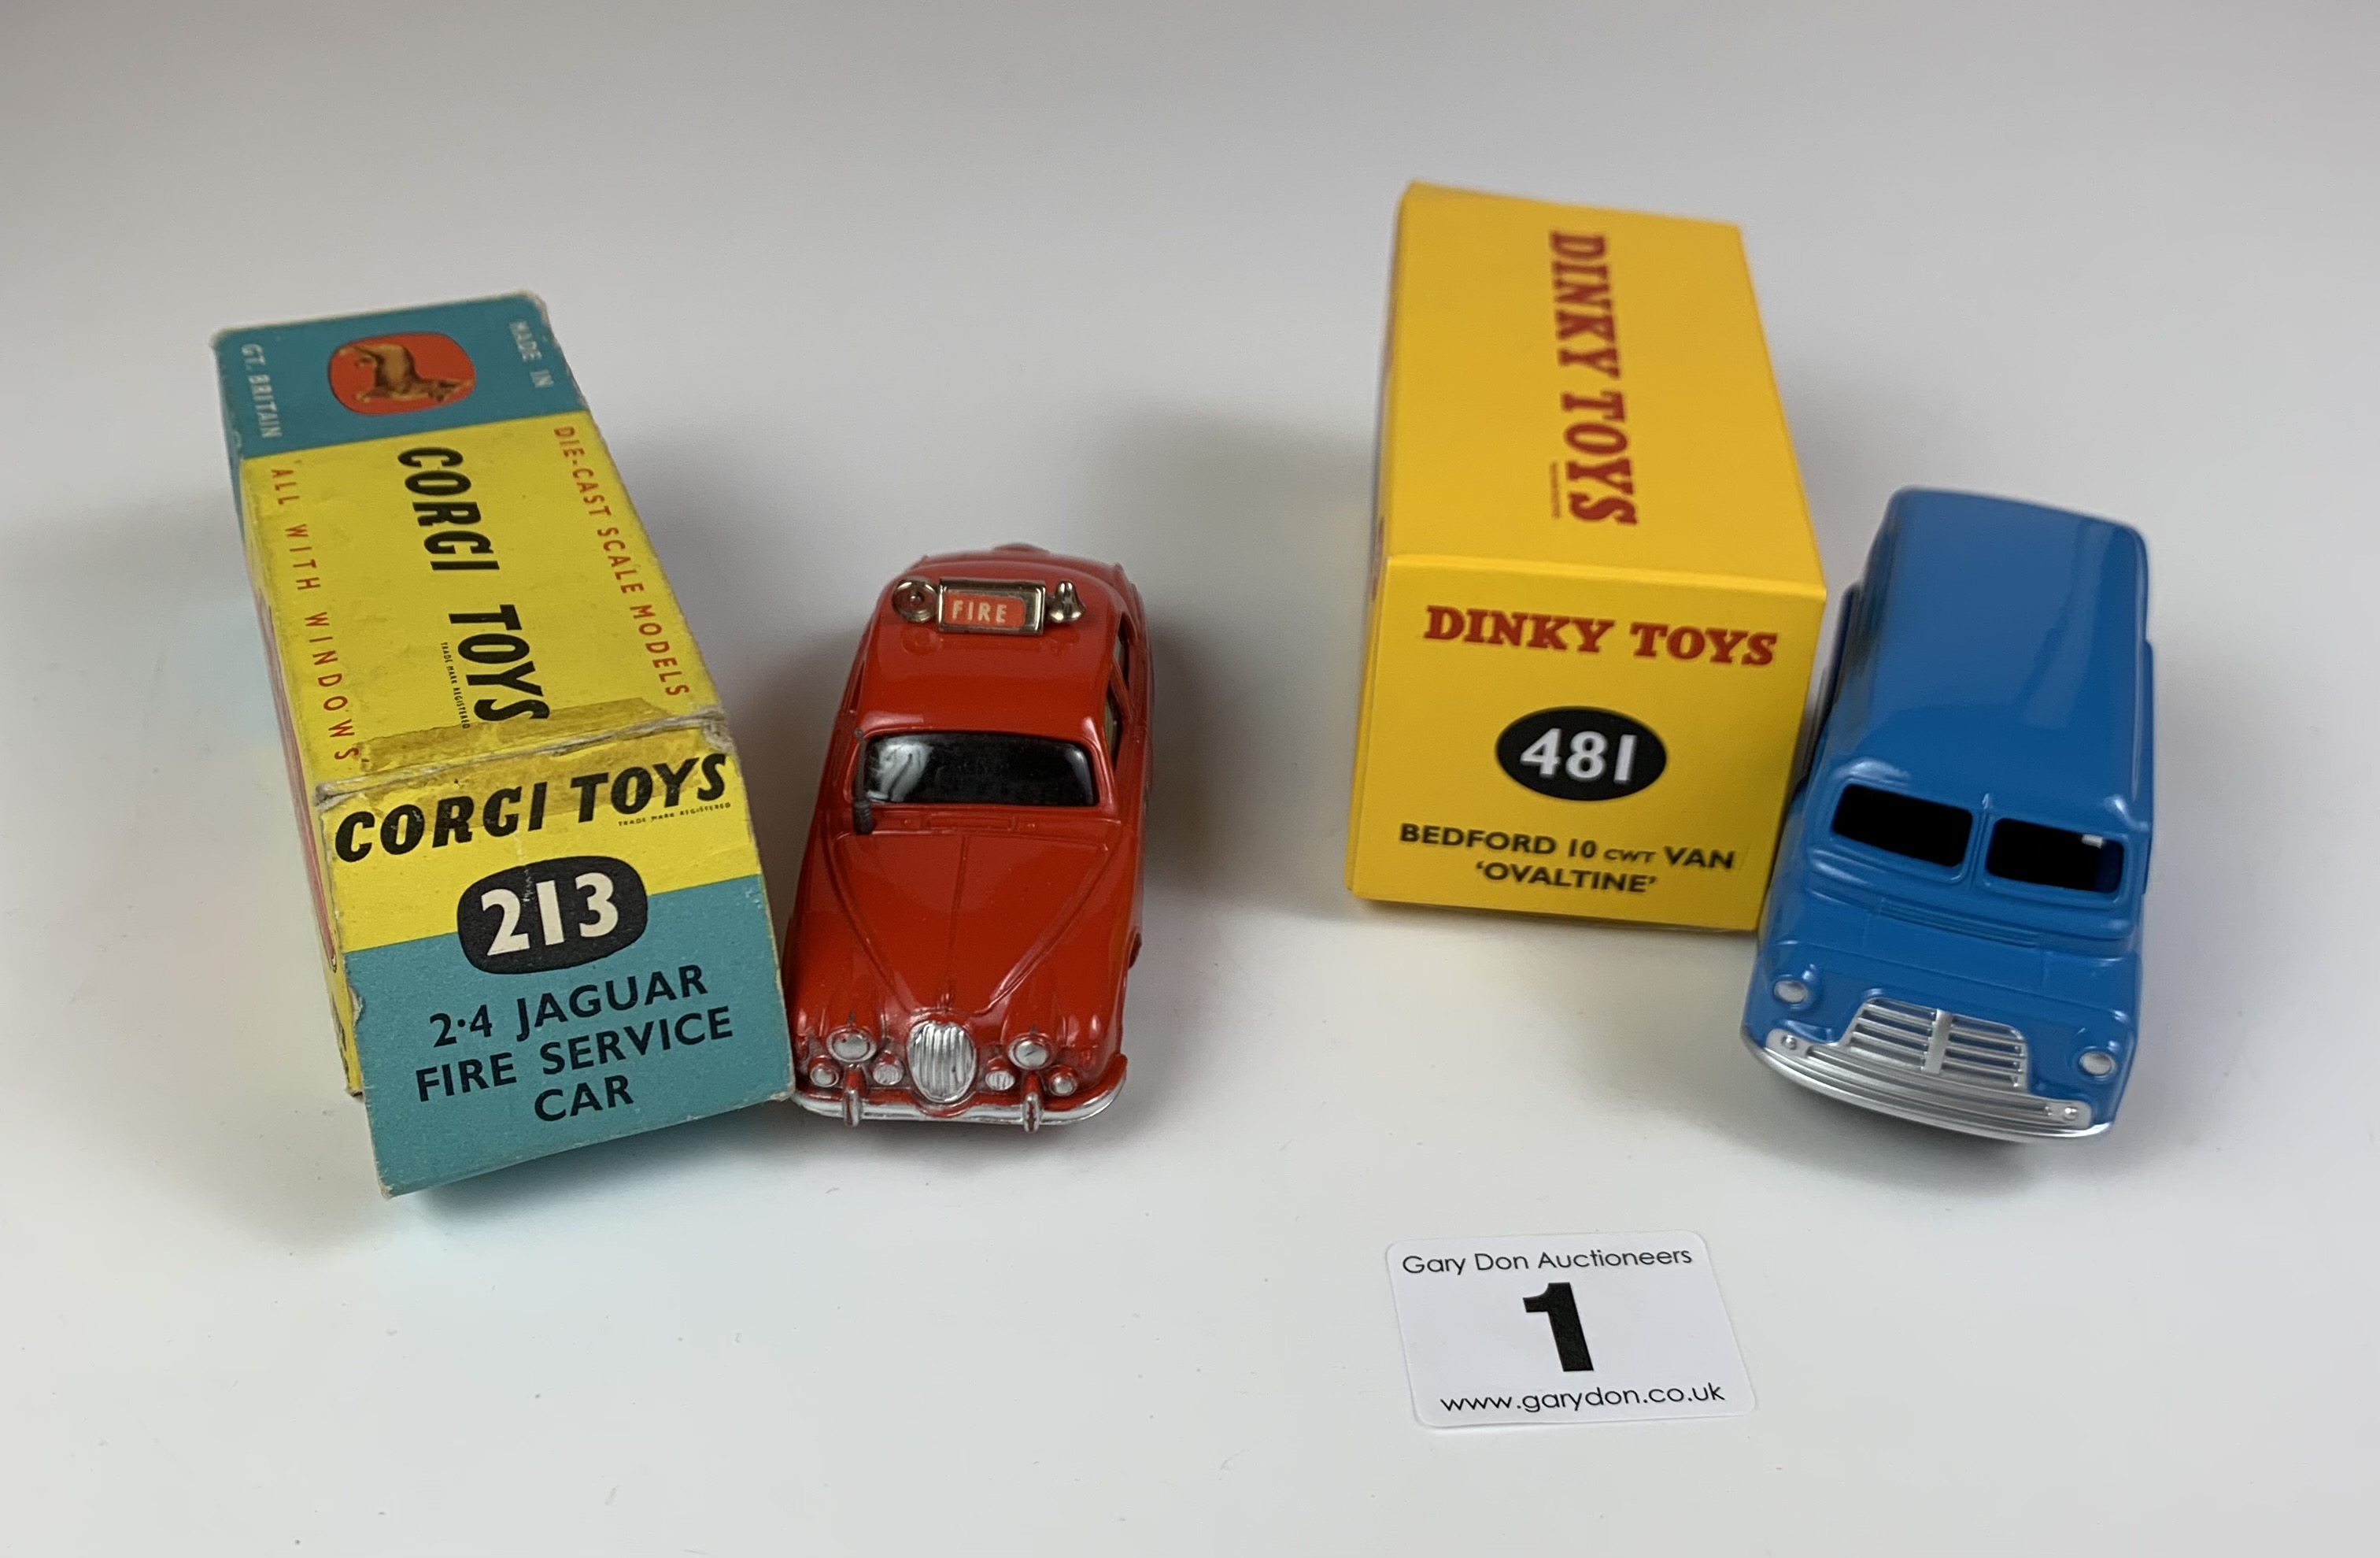 Boxed Dinky Toys 481 Bedford 10 CWT Van ‘Ovaltine’ and boxed Corgi Toys 213 2.4 Jaguar Fire - Image 3 of 11